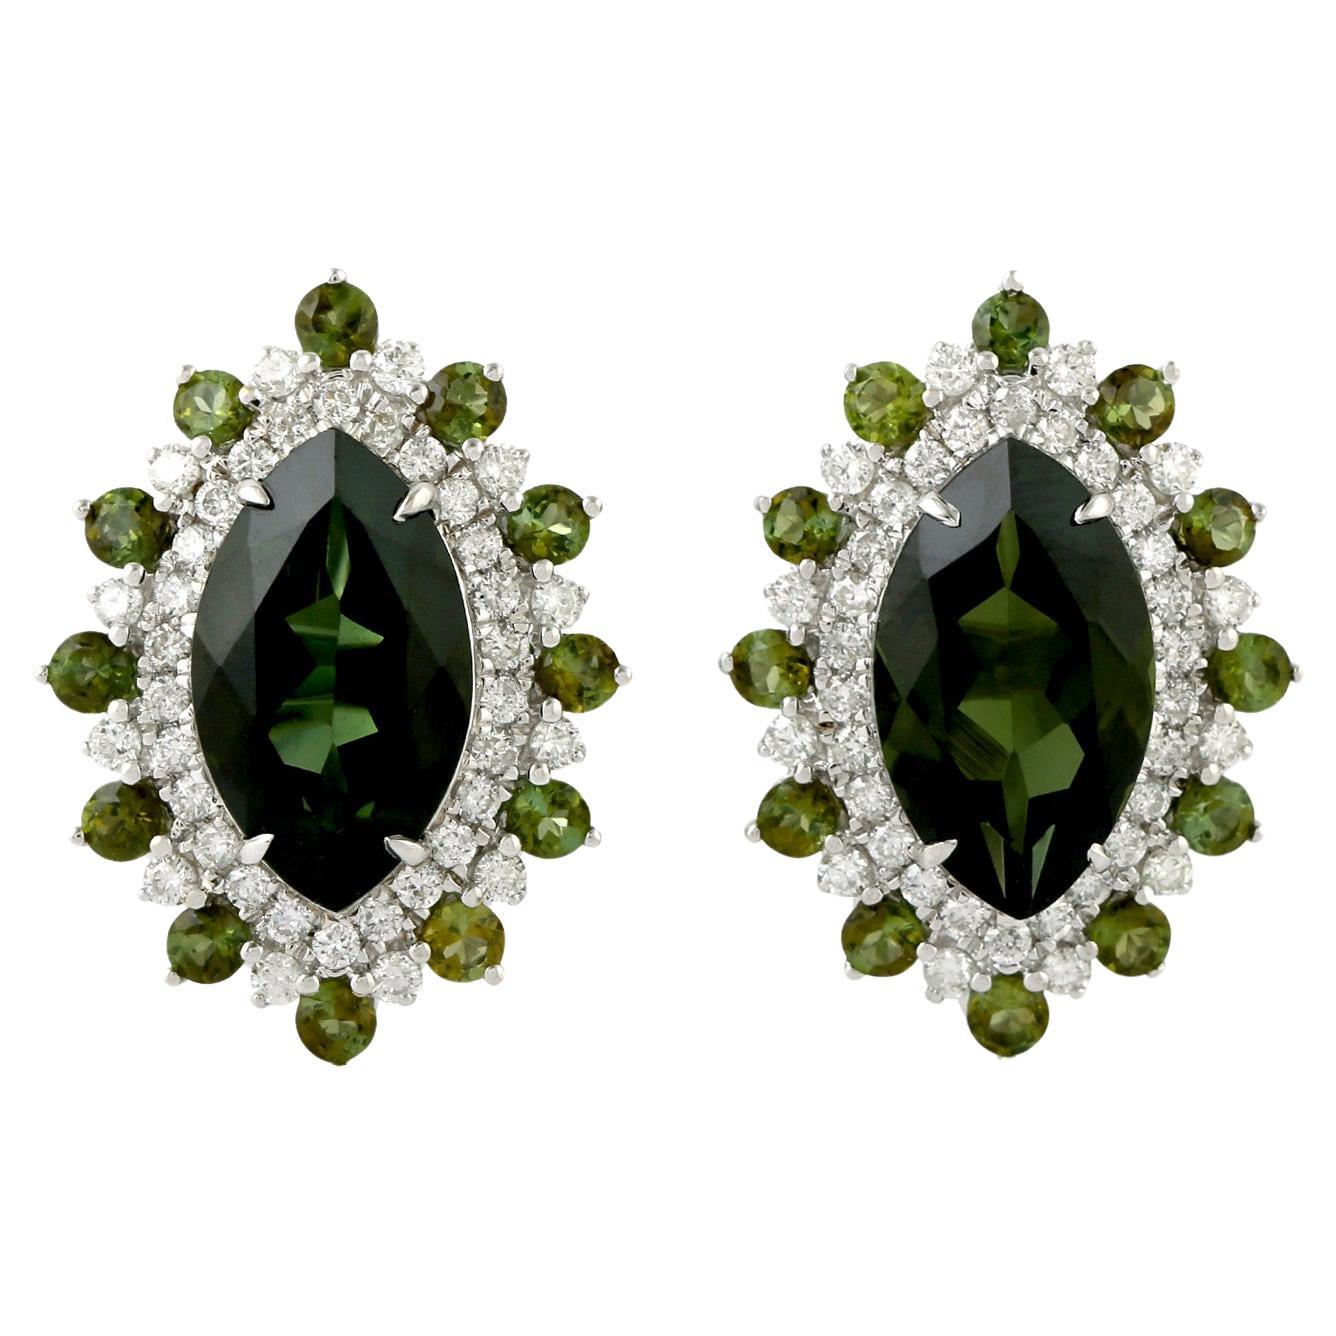 Marquise Shaped Green Tourmaline Studs With Diamonds Made In 18k White Gold For Sale